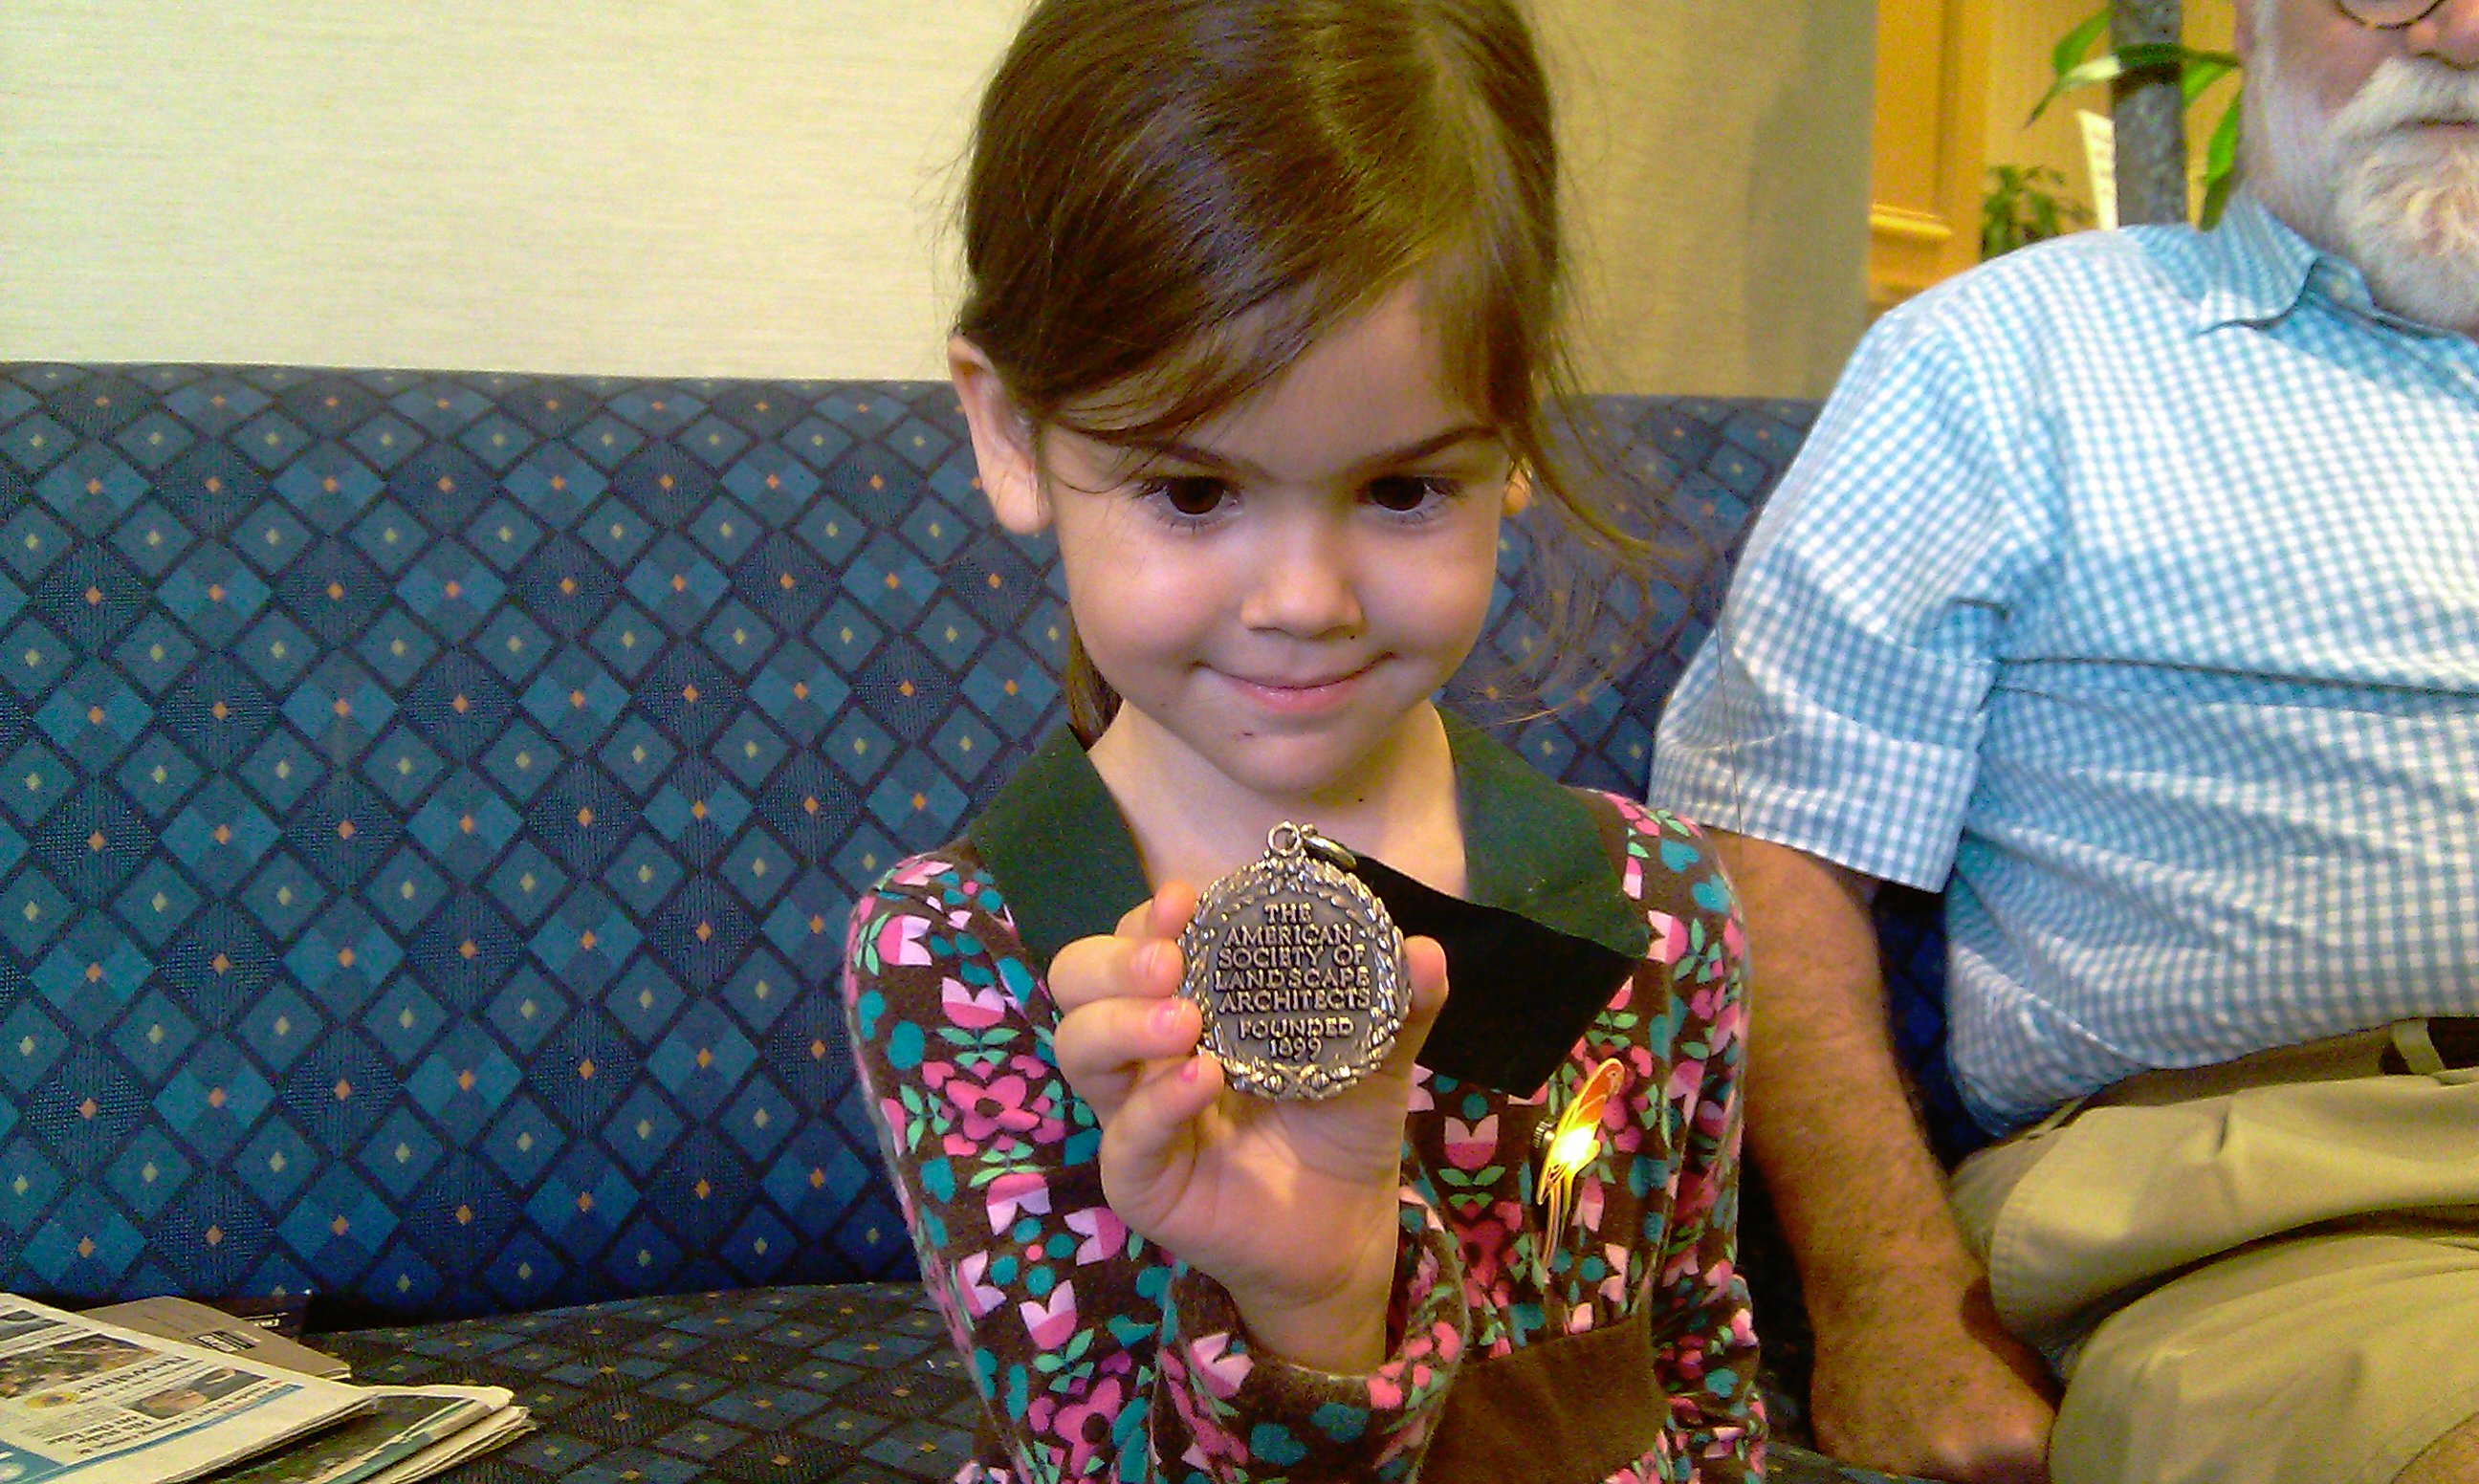 My daughter trying on Ted Baker's Fellows medal at the Gainesville Conference